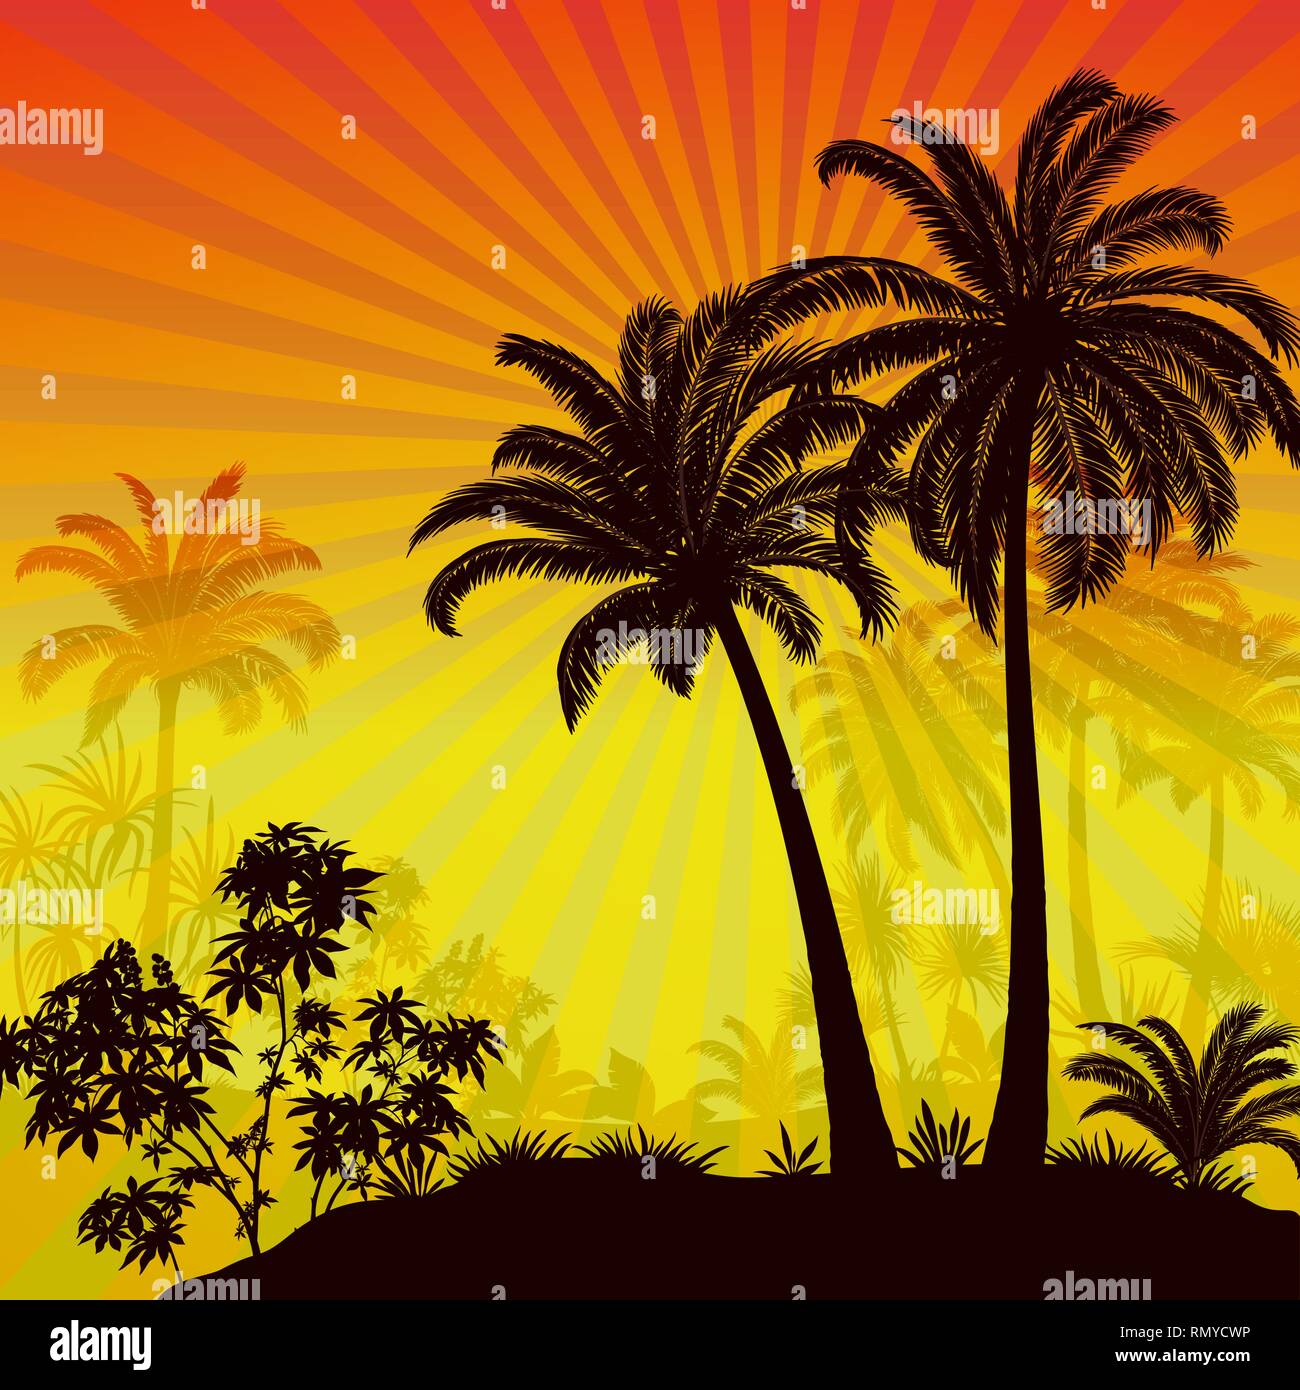 Labels with Tropical Landscape, Palms Trees and Exotic Plants Black Silhouettes on Background with Morning Sea, Mountains and Sky with Stars and Sunrays. Vector Stock Vector